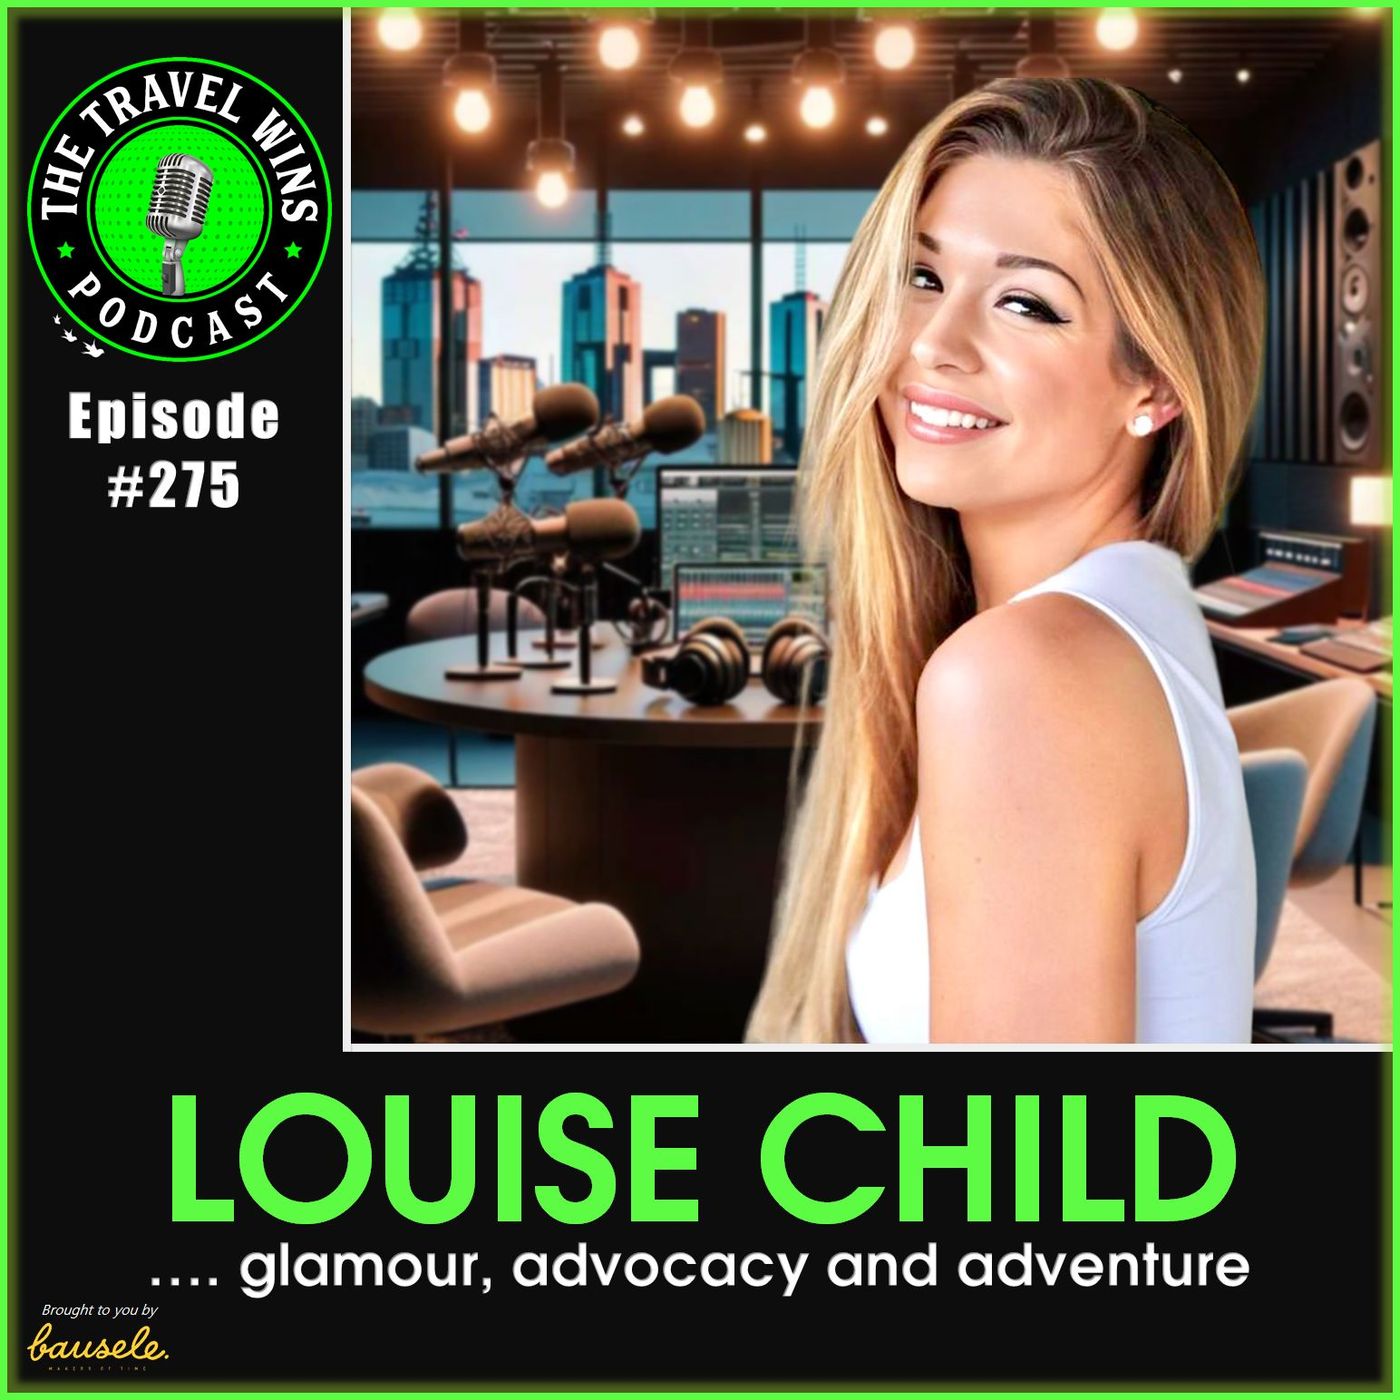 Louise Child glamour advocacy and adventure Ep. 275